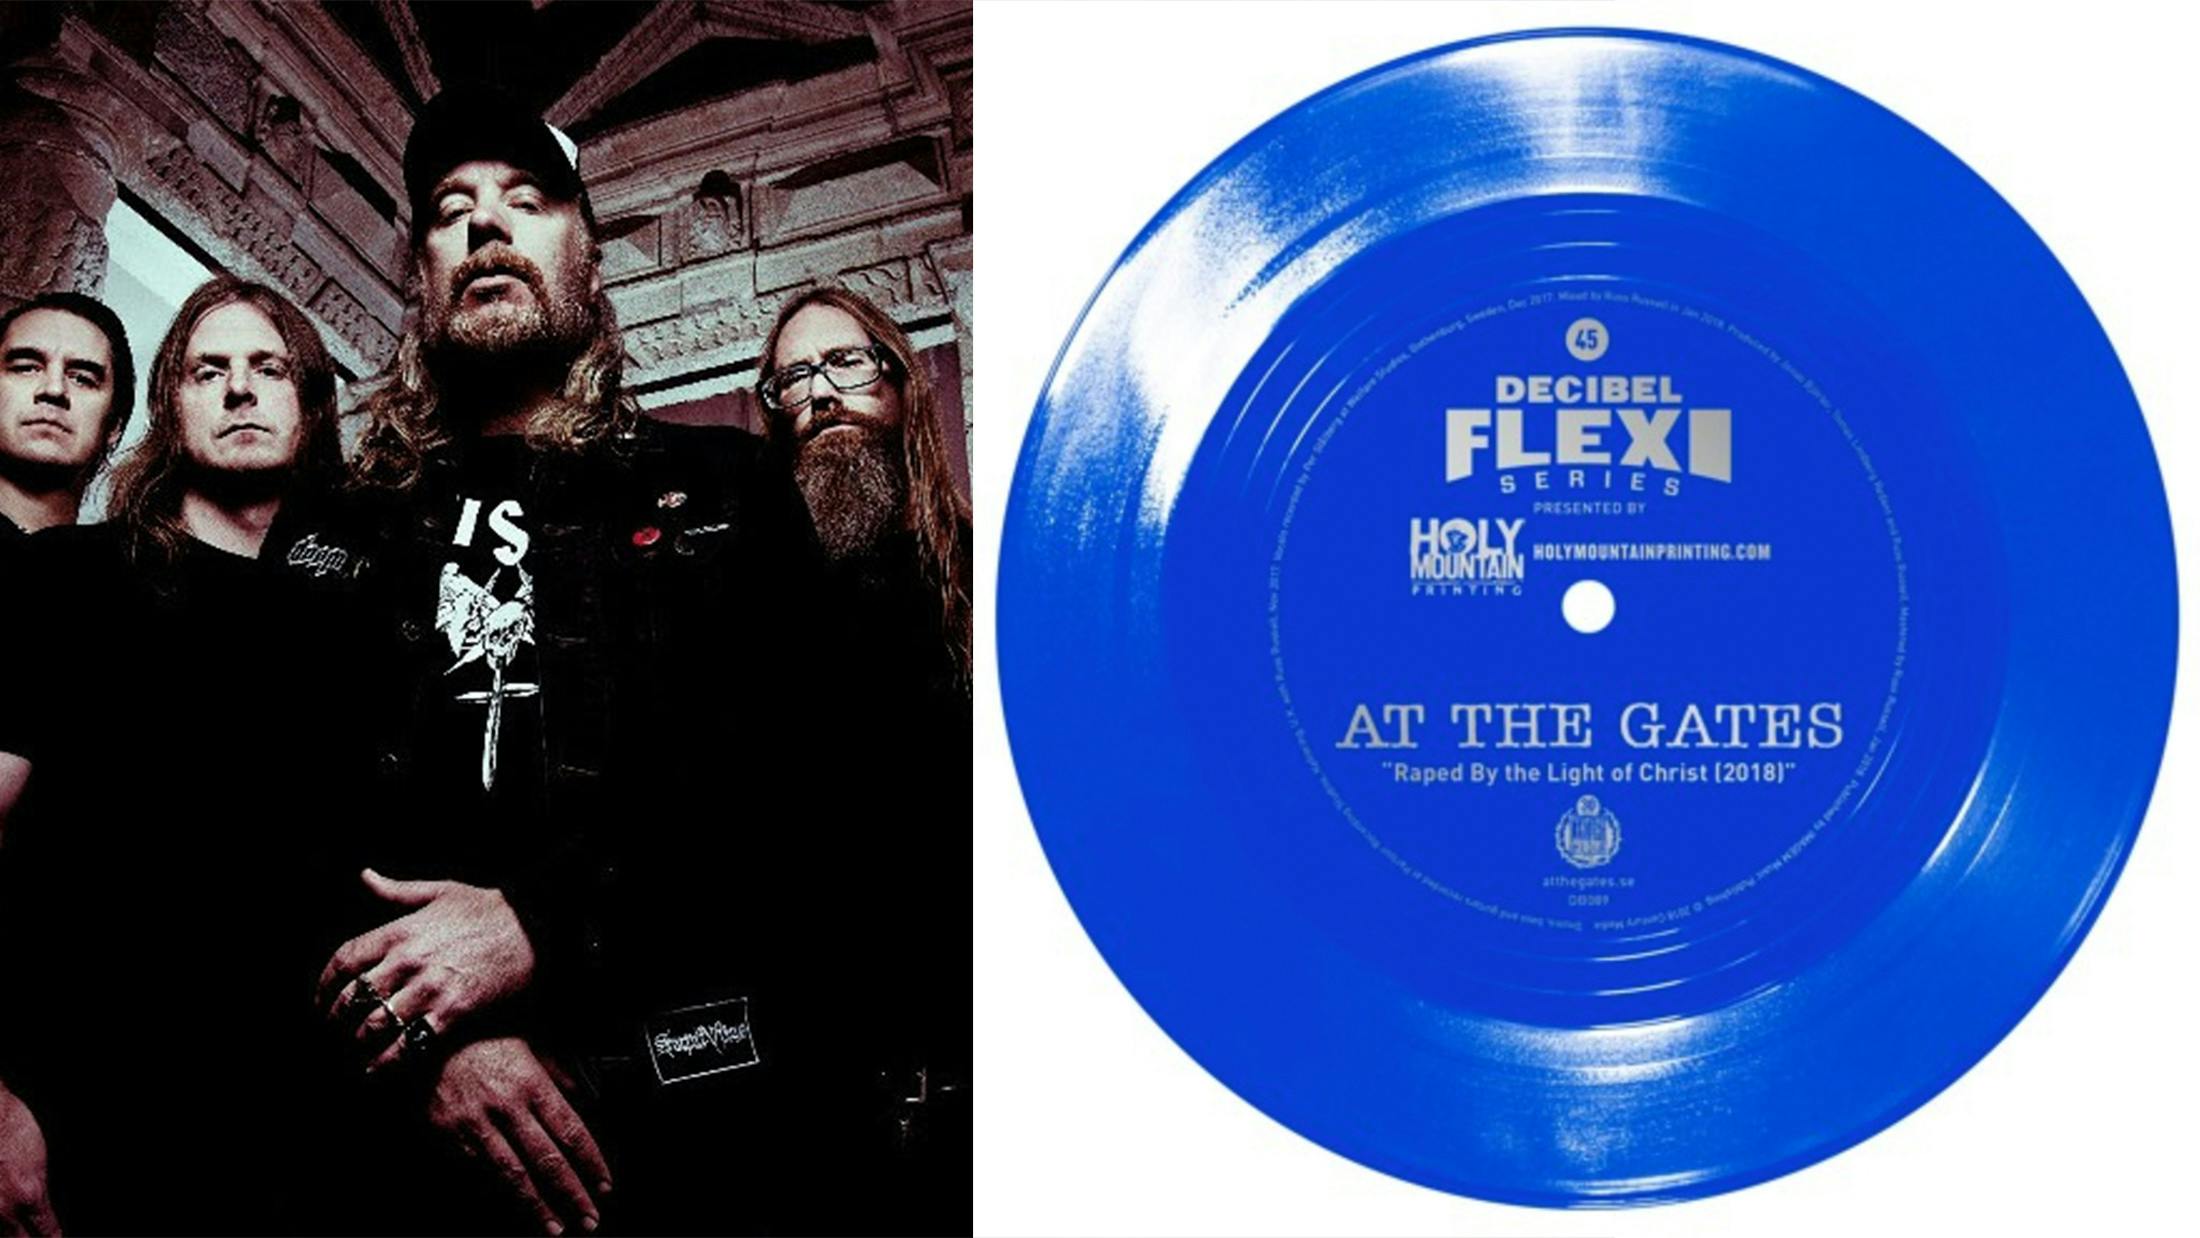 At The Gates Re-Record Raped By The Light Of Christ For Decibel Flexi Series